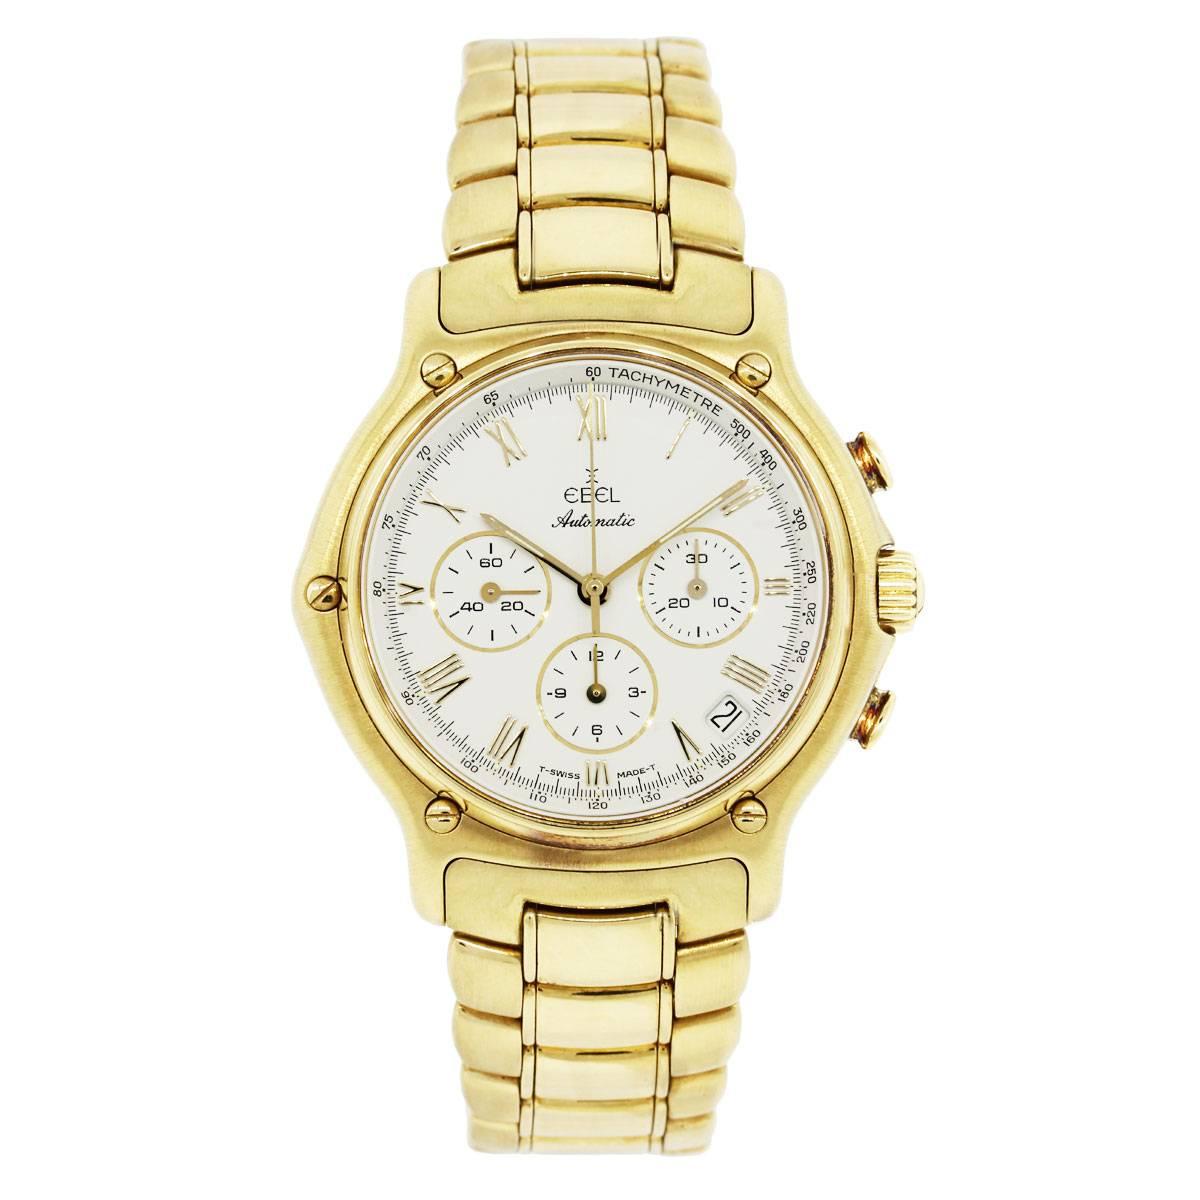 Brand: Ebel
MPN: 1911
Case Material: 18k yellow gold
Case Diameter: 40mm
Crystal: Sapphire crystal
Bezel: Smooth 18k yellow gold
Dial: Cream color chronograph dial with yellow gold roman hour markers and yellow gold hands, date window at 4 o’clock